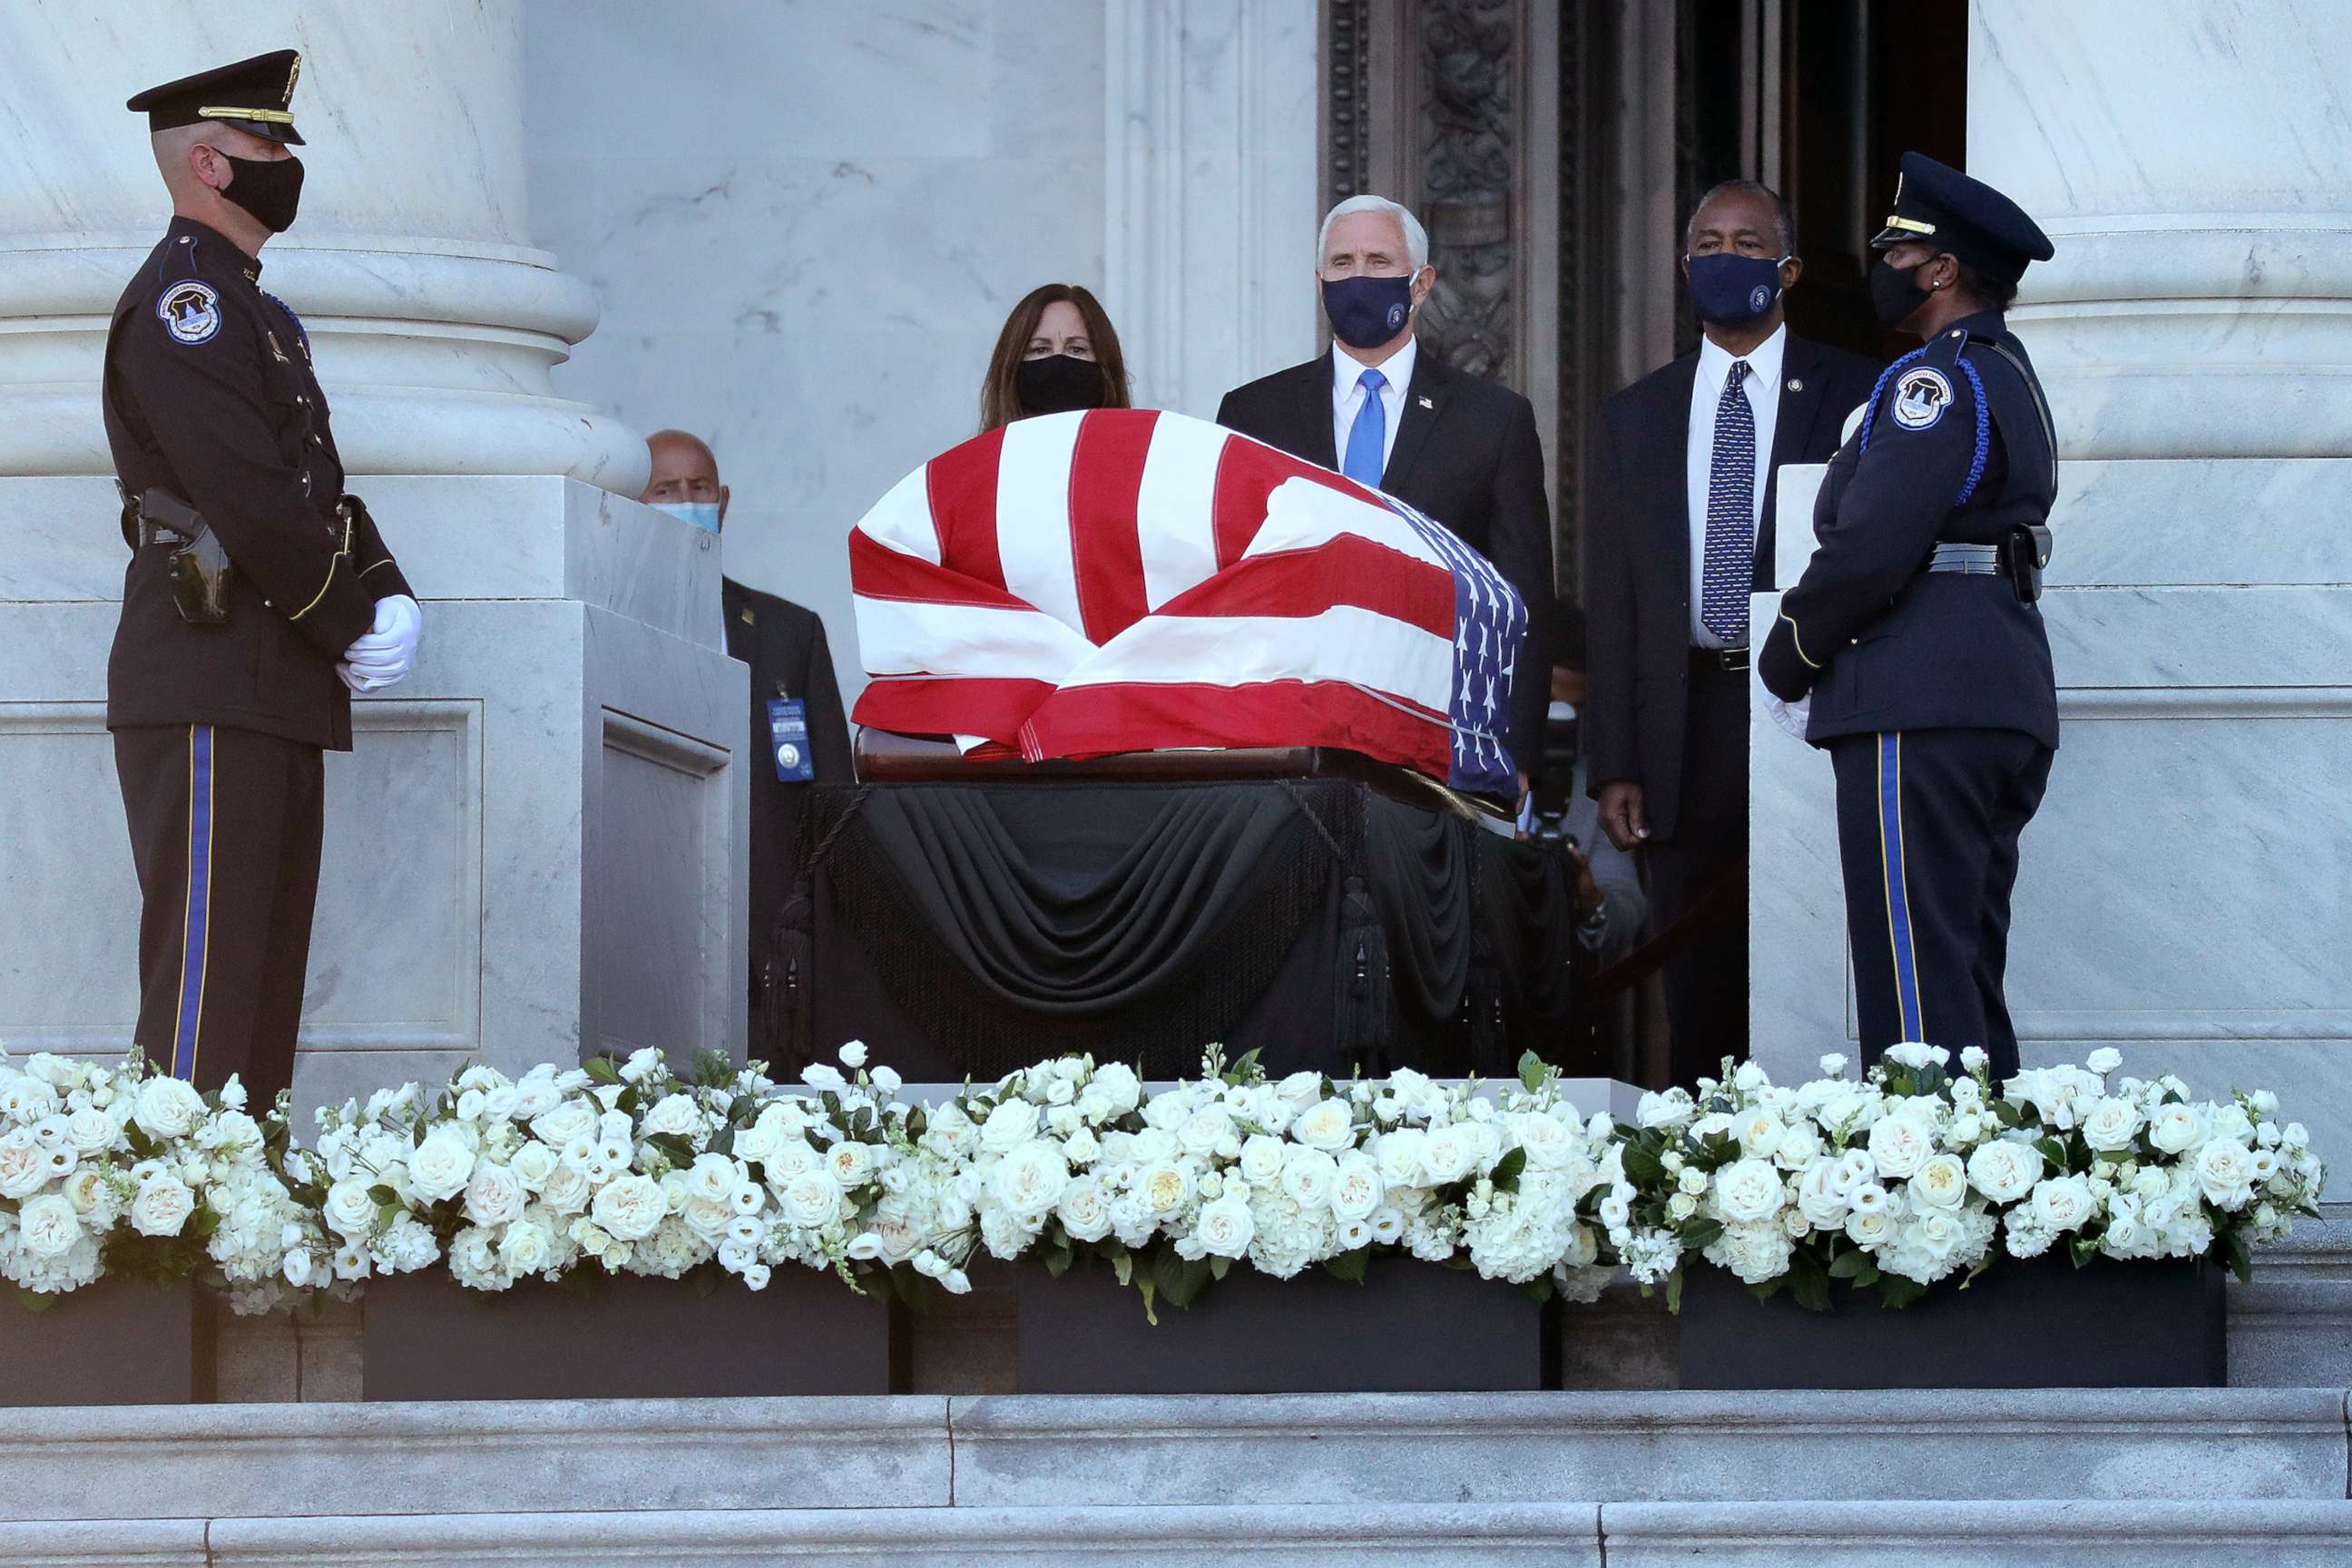 PHOTO: Vice President Mike Pence, his wife Karen Pence and Housing and Urban Development Secretary Ben Carson pay their respects to Rep. John Lewis (D-GA) as his flag-draped casket is displayed at the Capitol, July 27, 2020, in Washington, D.C. 